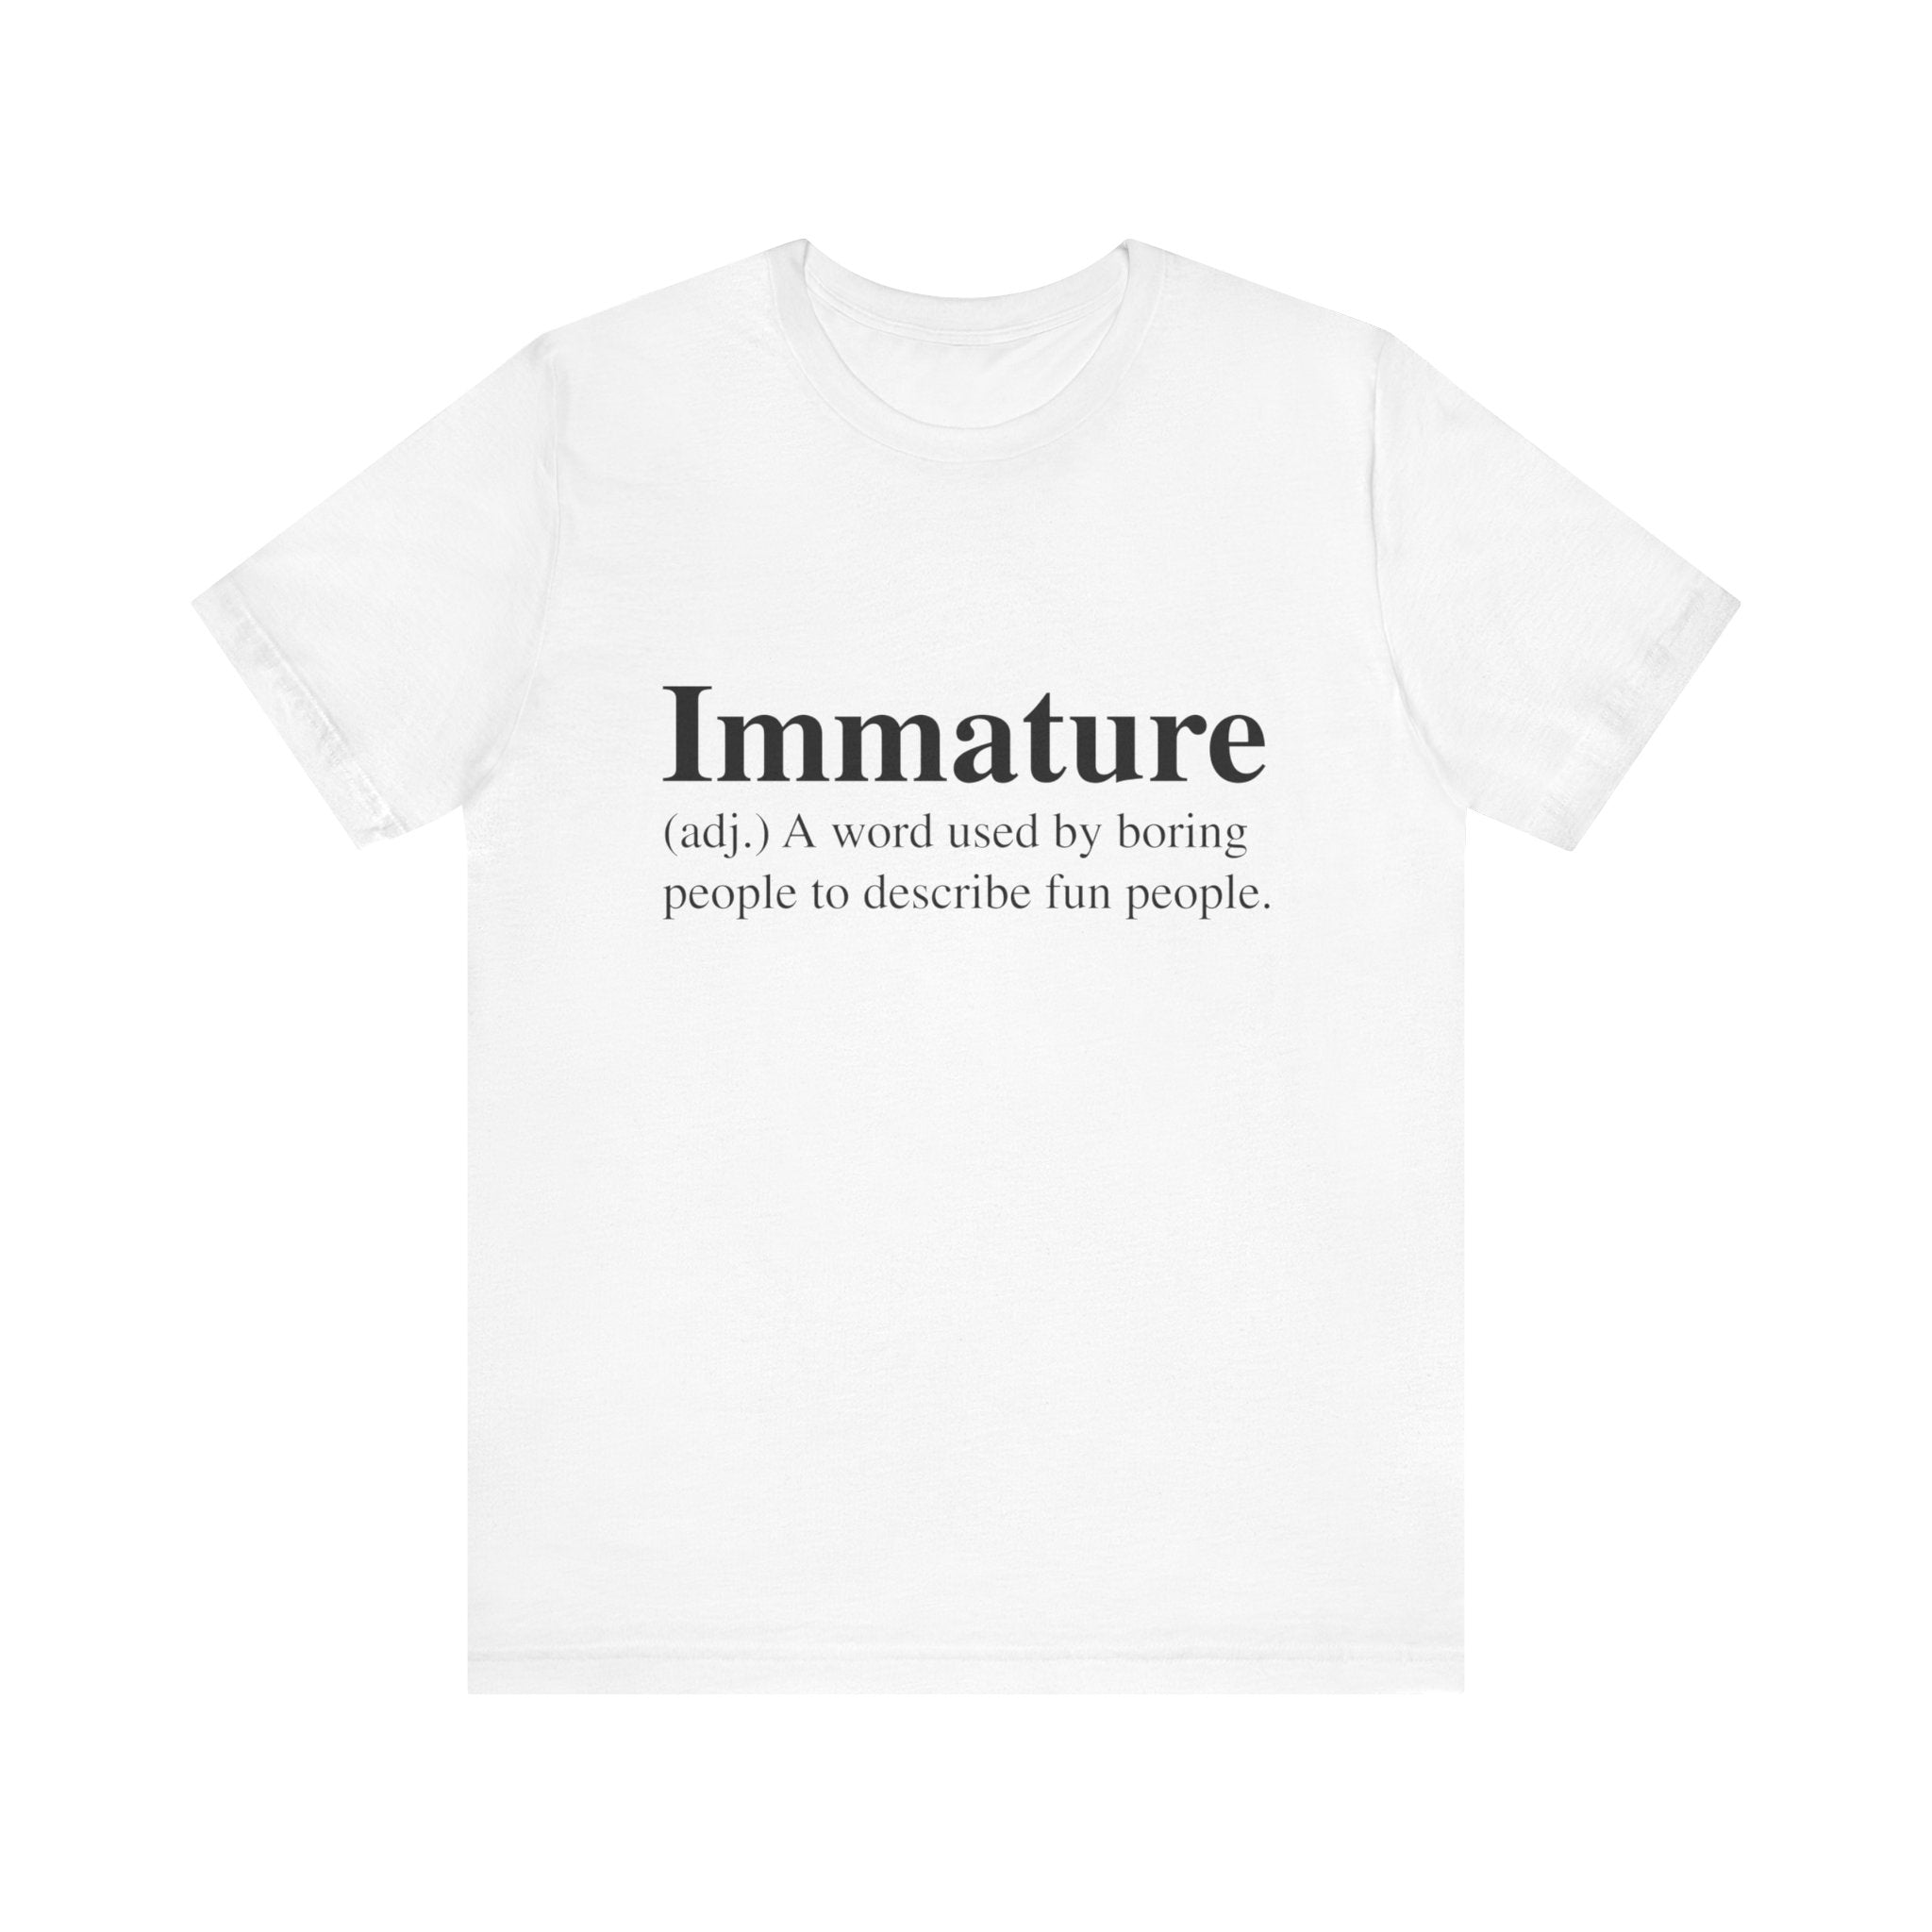 Unisex jersey tee with the word "Immature T-Shirt" and its humorous definition printed in quality black text on the front.